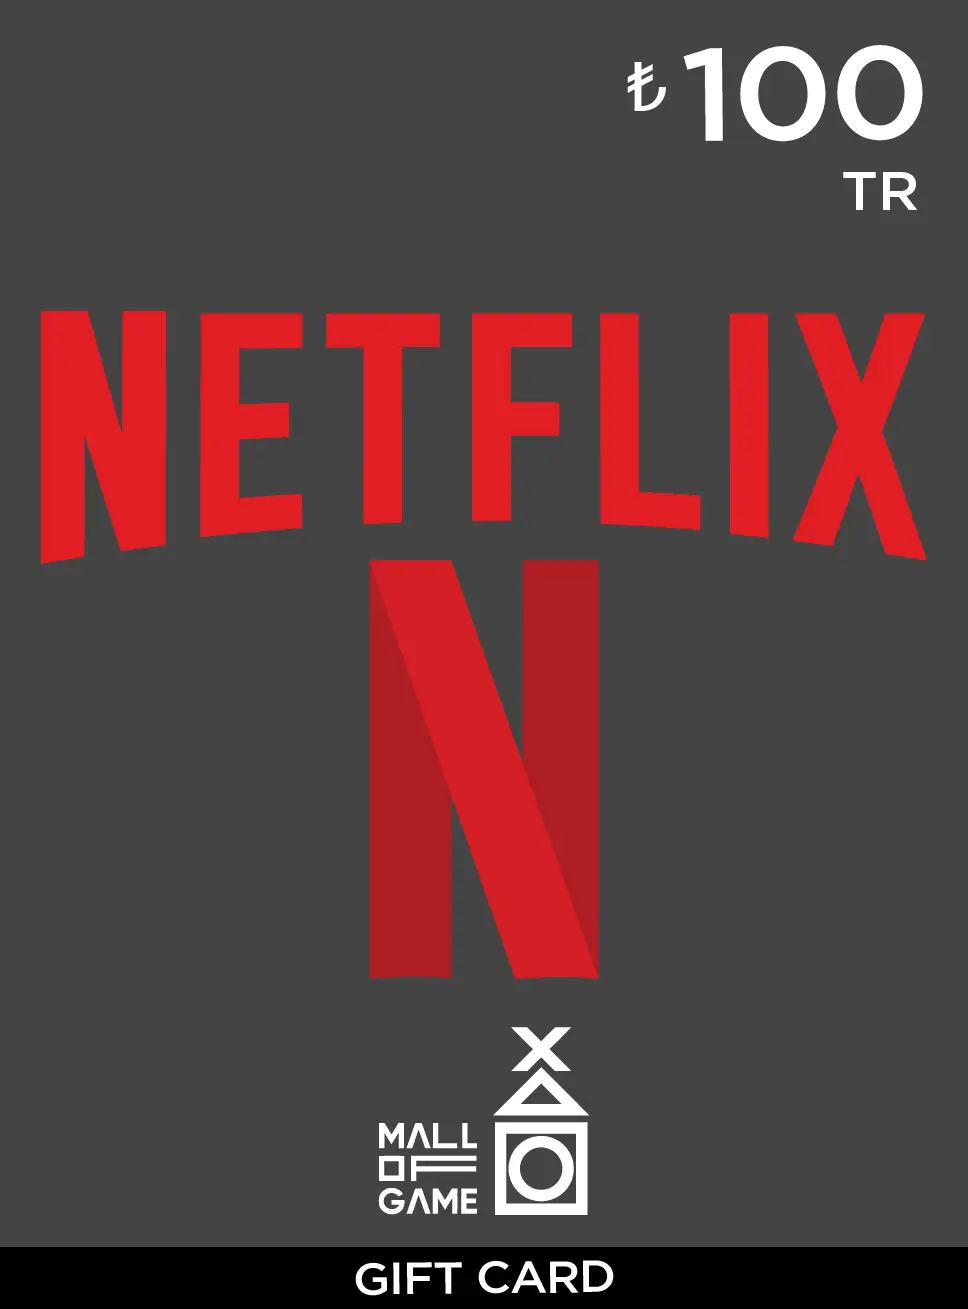 Netflix Gift Cards TRY100 (TR)